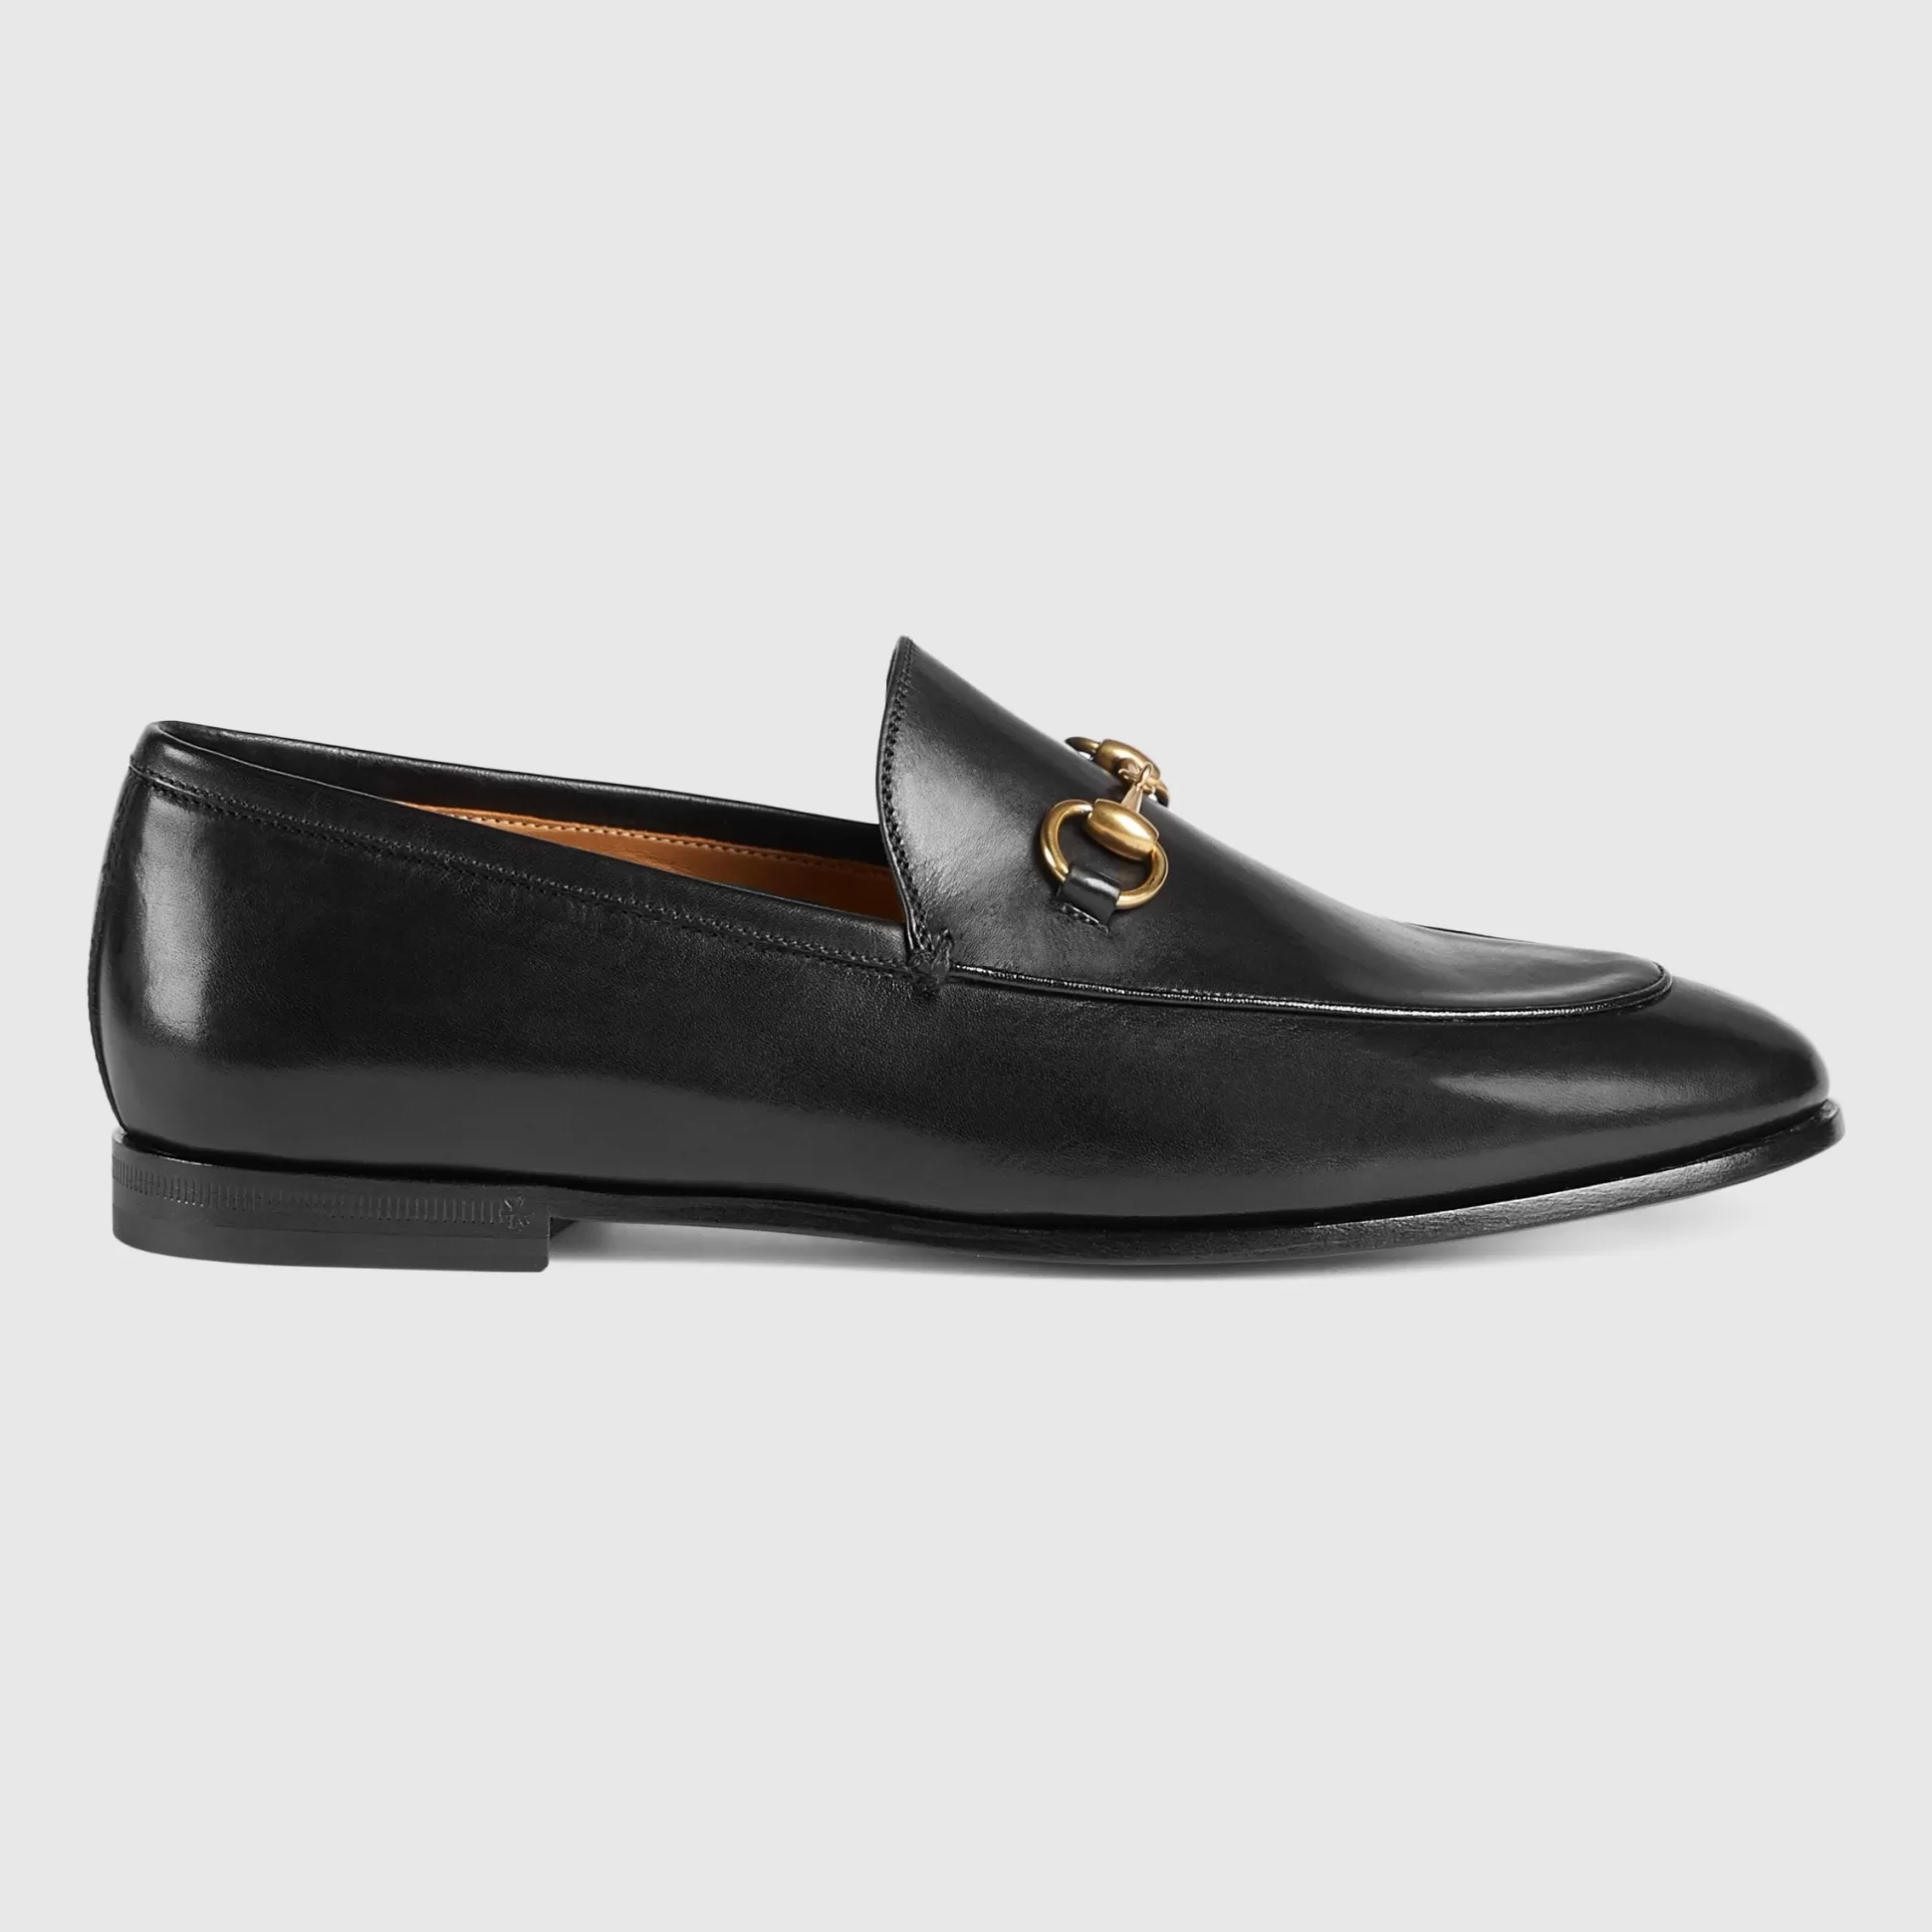 GUCCI Women'S Jordaan Leather Loafer-Women Loafers & Lace-Ups